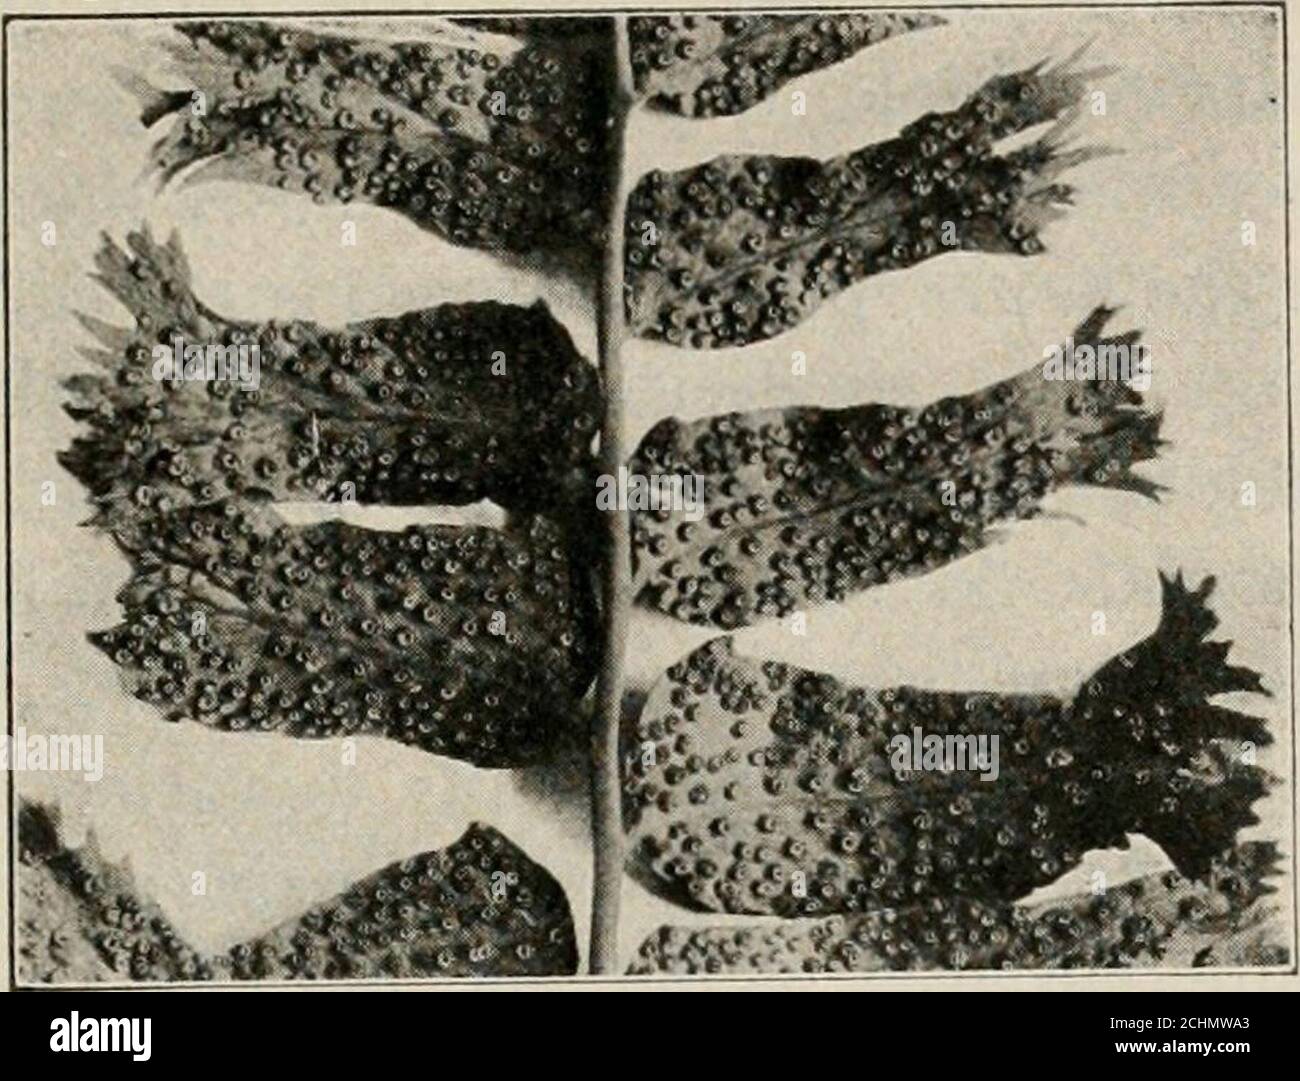 . Heredity and evolution in plants . FIG. 9.—Cross-section through the marginal sorus of a sporophyll ofthe bracken fern (Pleris aquilina). I, palisade layer; fb, vascular bundle;xp, sporangium; in, indusium. (Greatly magnified.) as, for example, Polypodium, is composed of a cluster oftiny stalked cases. The cases contain minute unicellularreproductive bodies called spores, and the entire structureis a sporangium. The place where the sporangia areattached to the leaf is the sporangiophore1 (Fig. 9), andover all is often found a thin membranous covering, theindusium (Figs. 9 and 10). In some fe Stock Photo